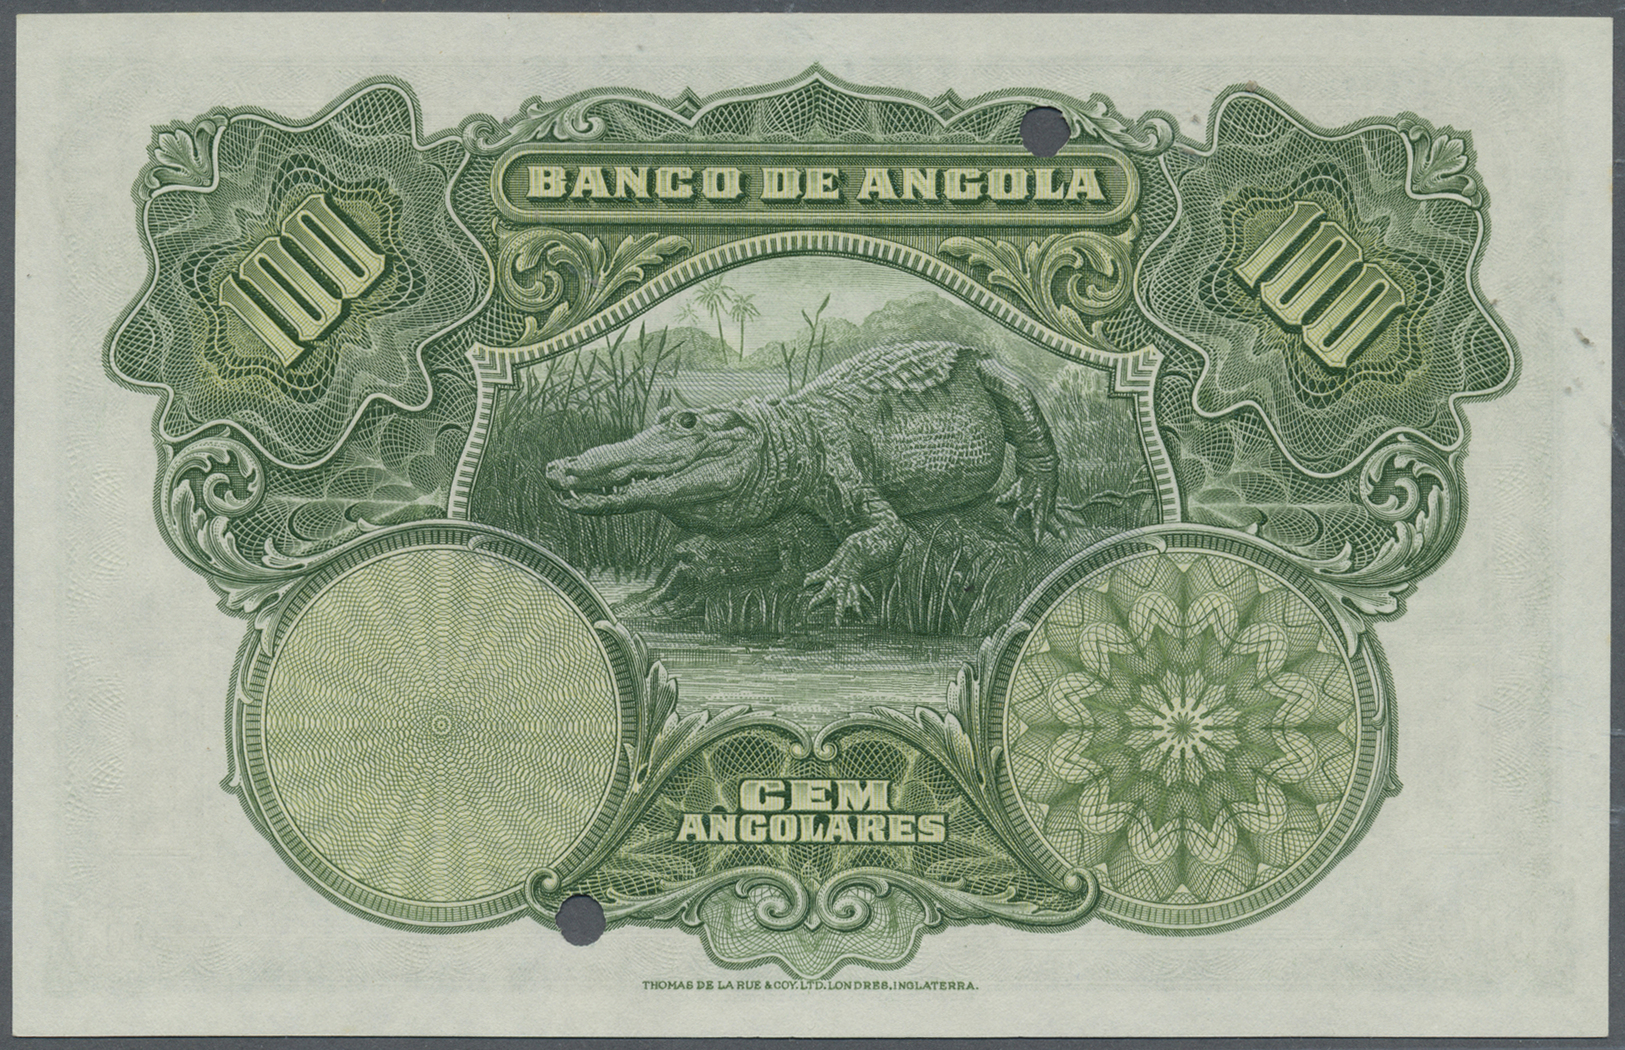 00030 Angola: 100 Angolares 1927 With Red Overprint "SPECIMEN", Punch Hole Cancellation And Serial Number 2F00000, P.75s - Angola